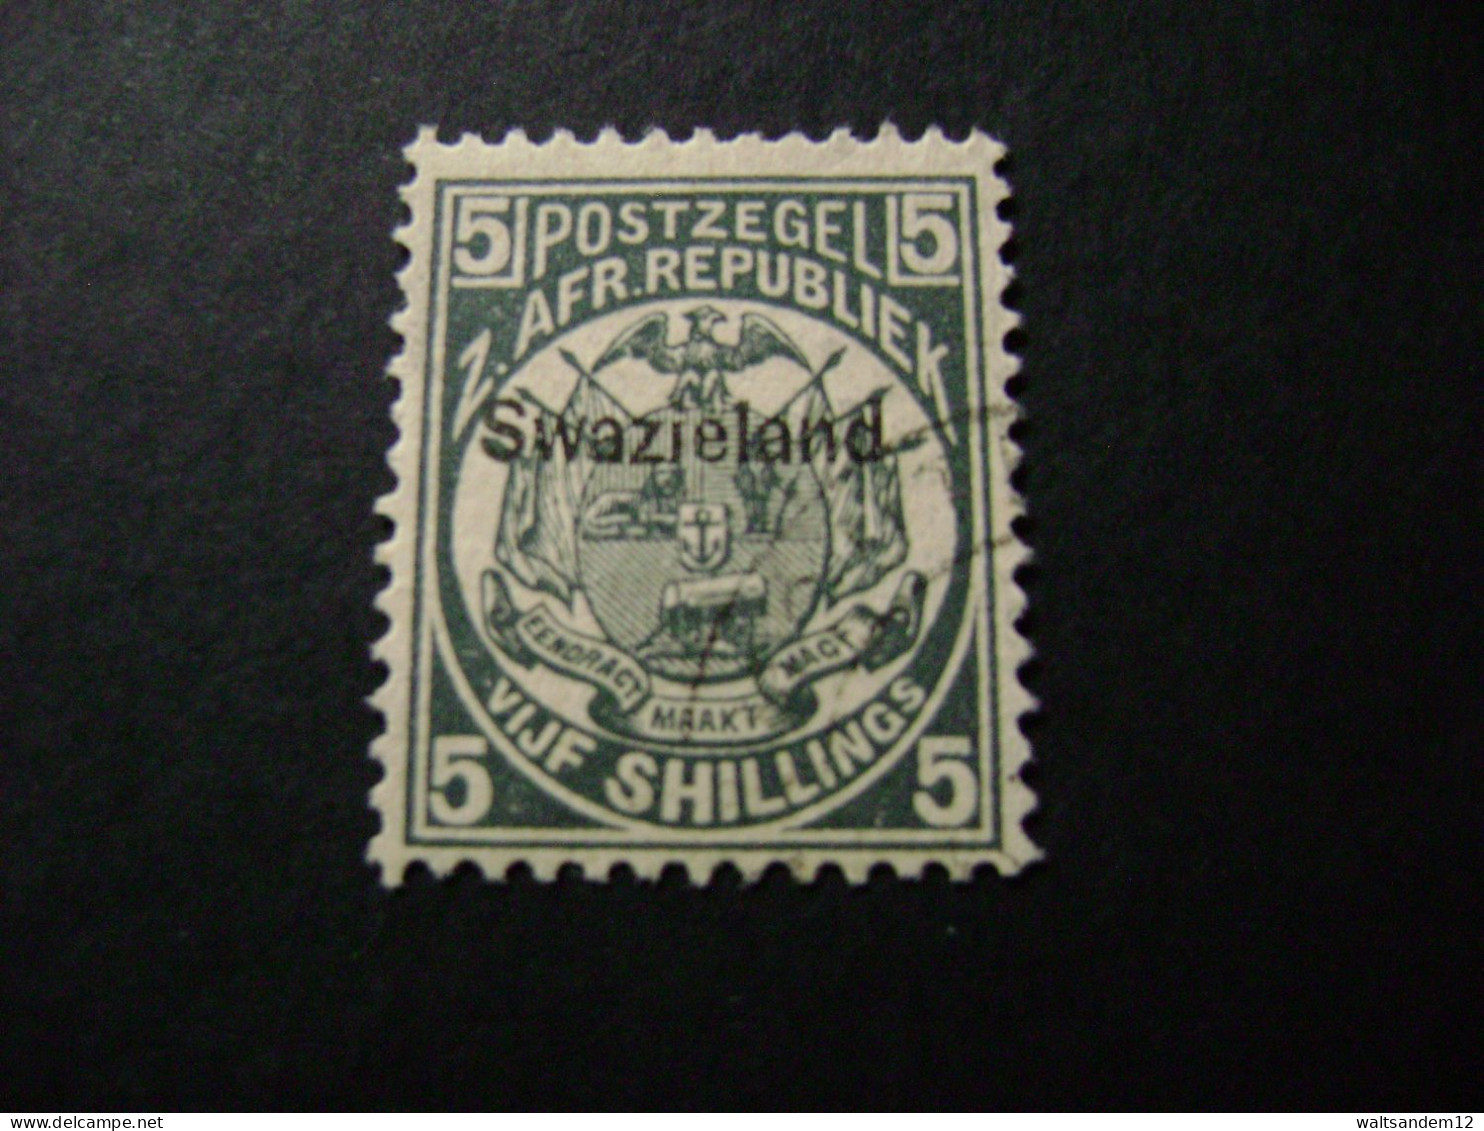 Swaziland - 1890 5/- (SG 8) - Used Definitive Stamp - Swasiland (...-1967)